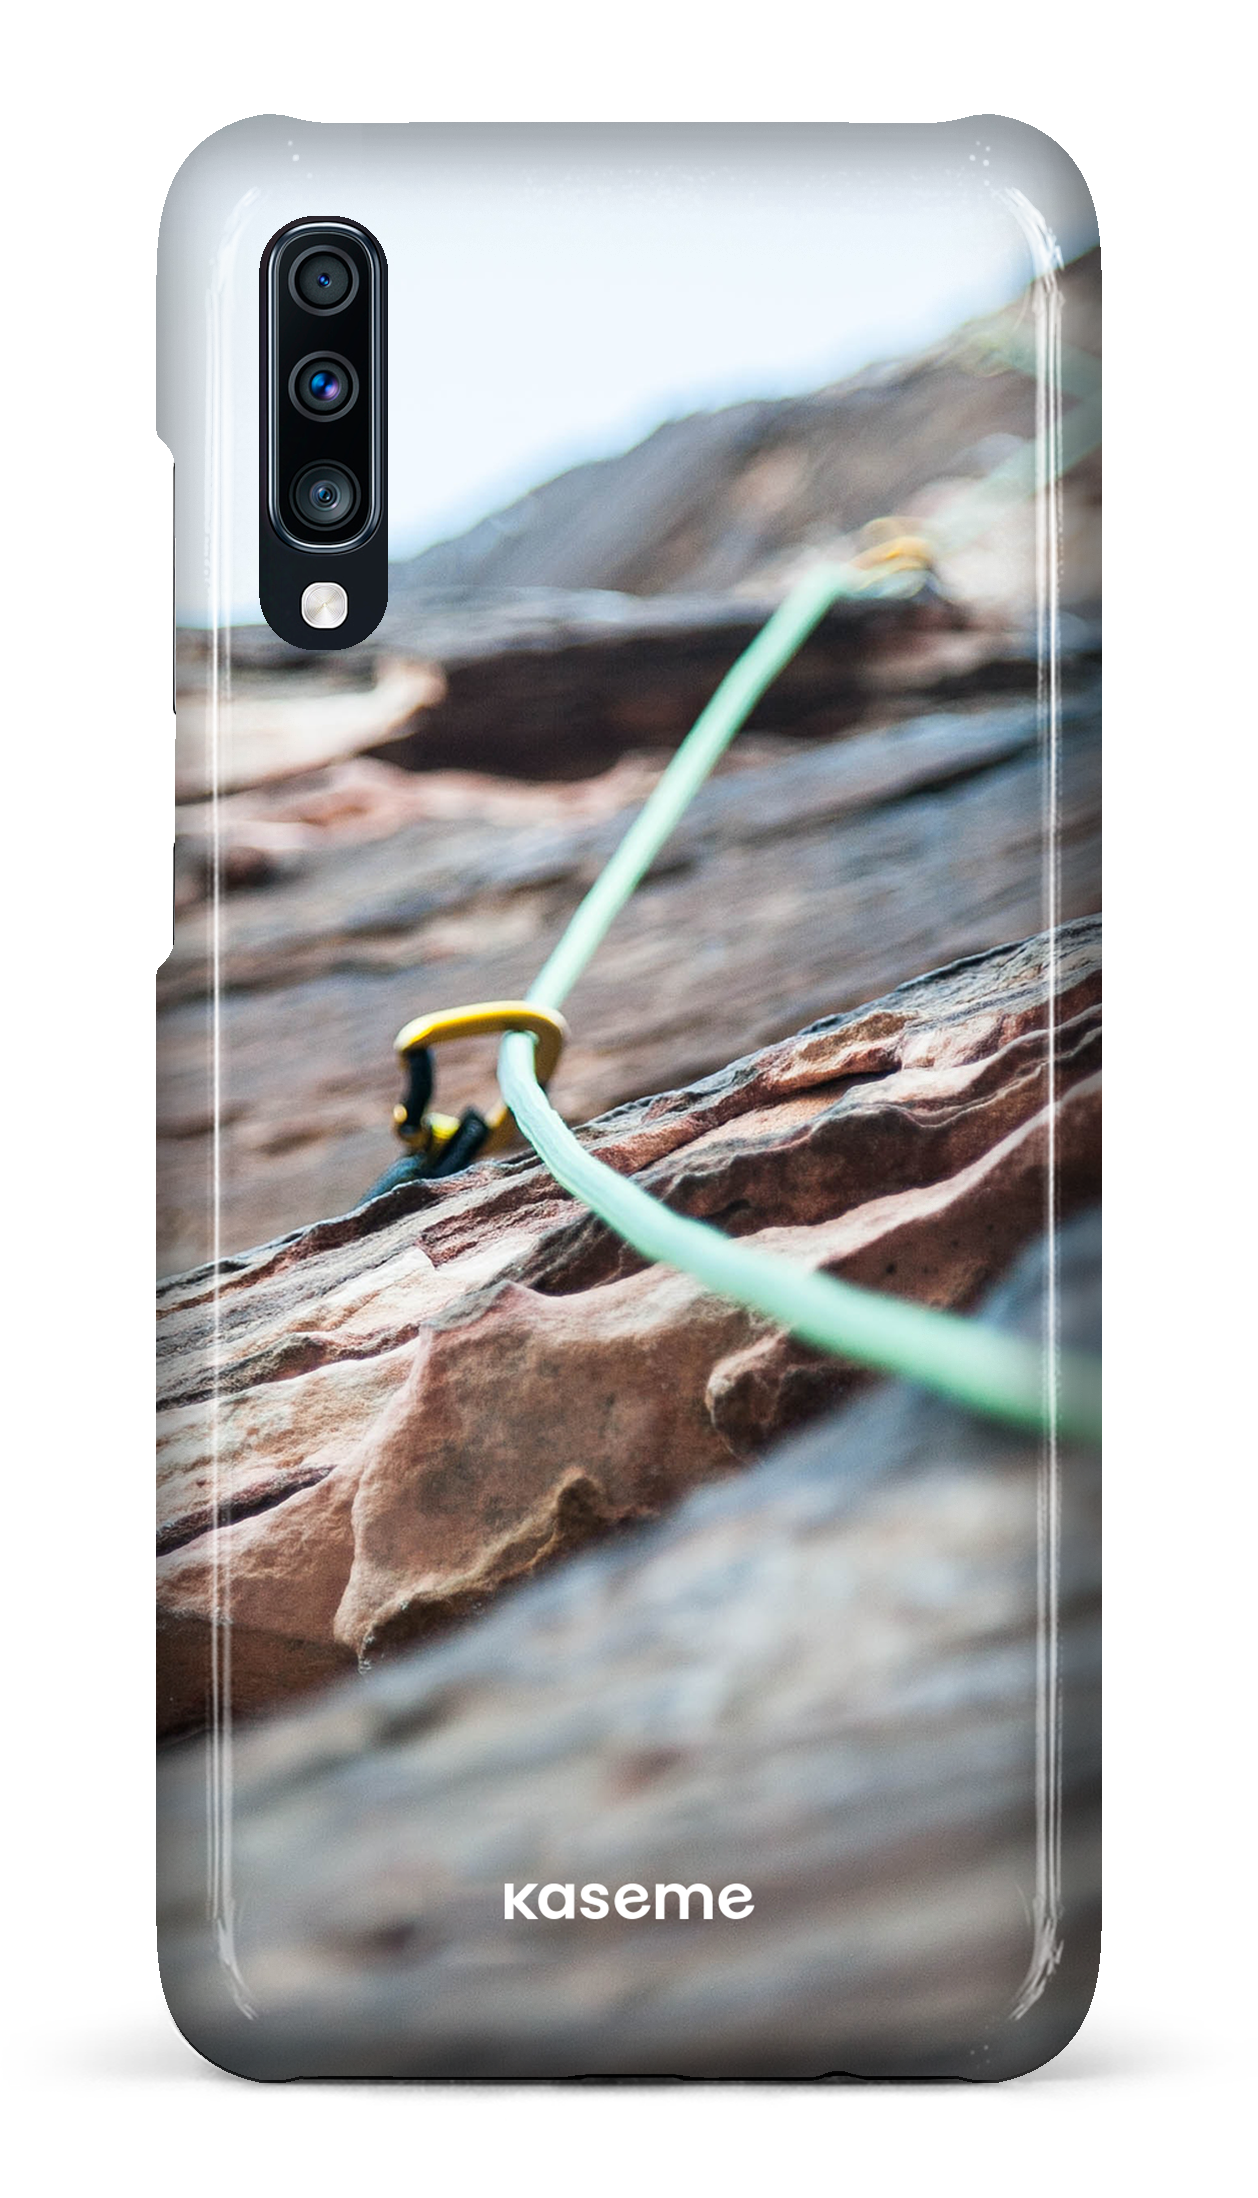 Top rope - Galaxy A70